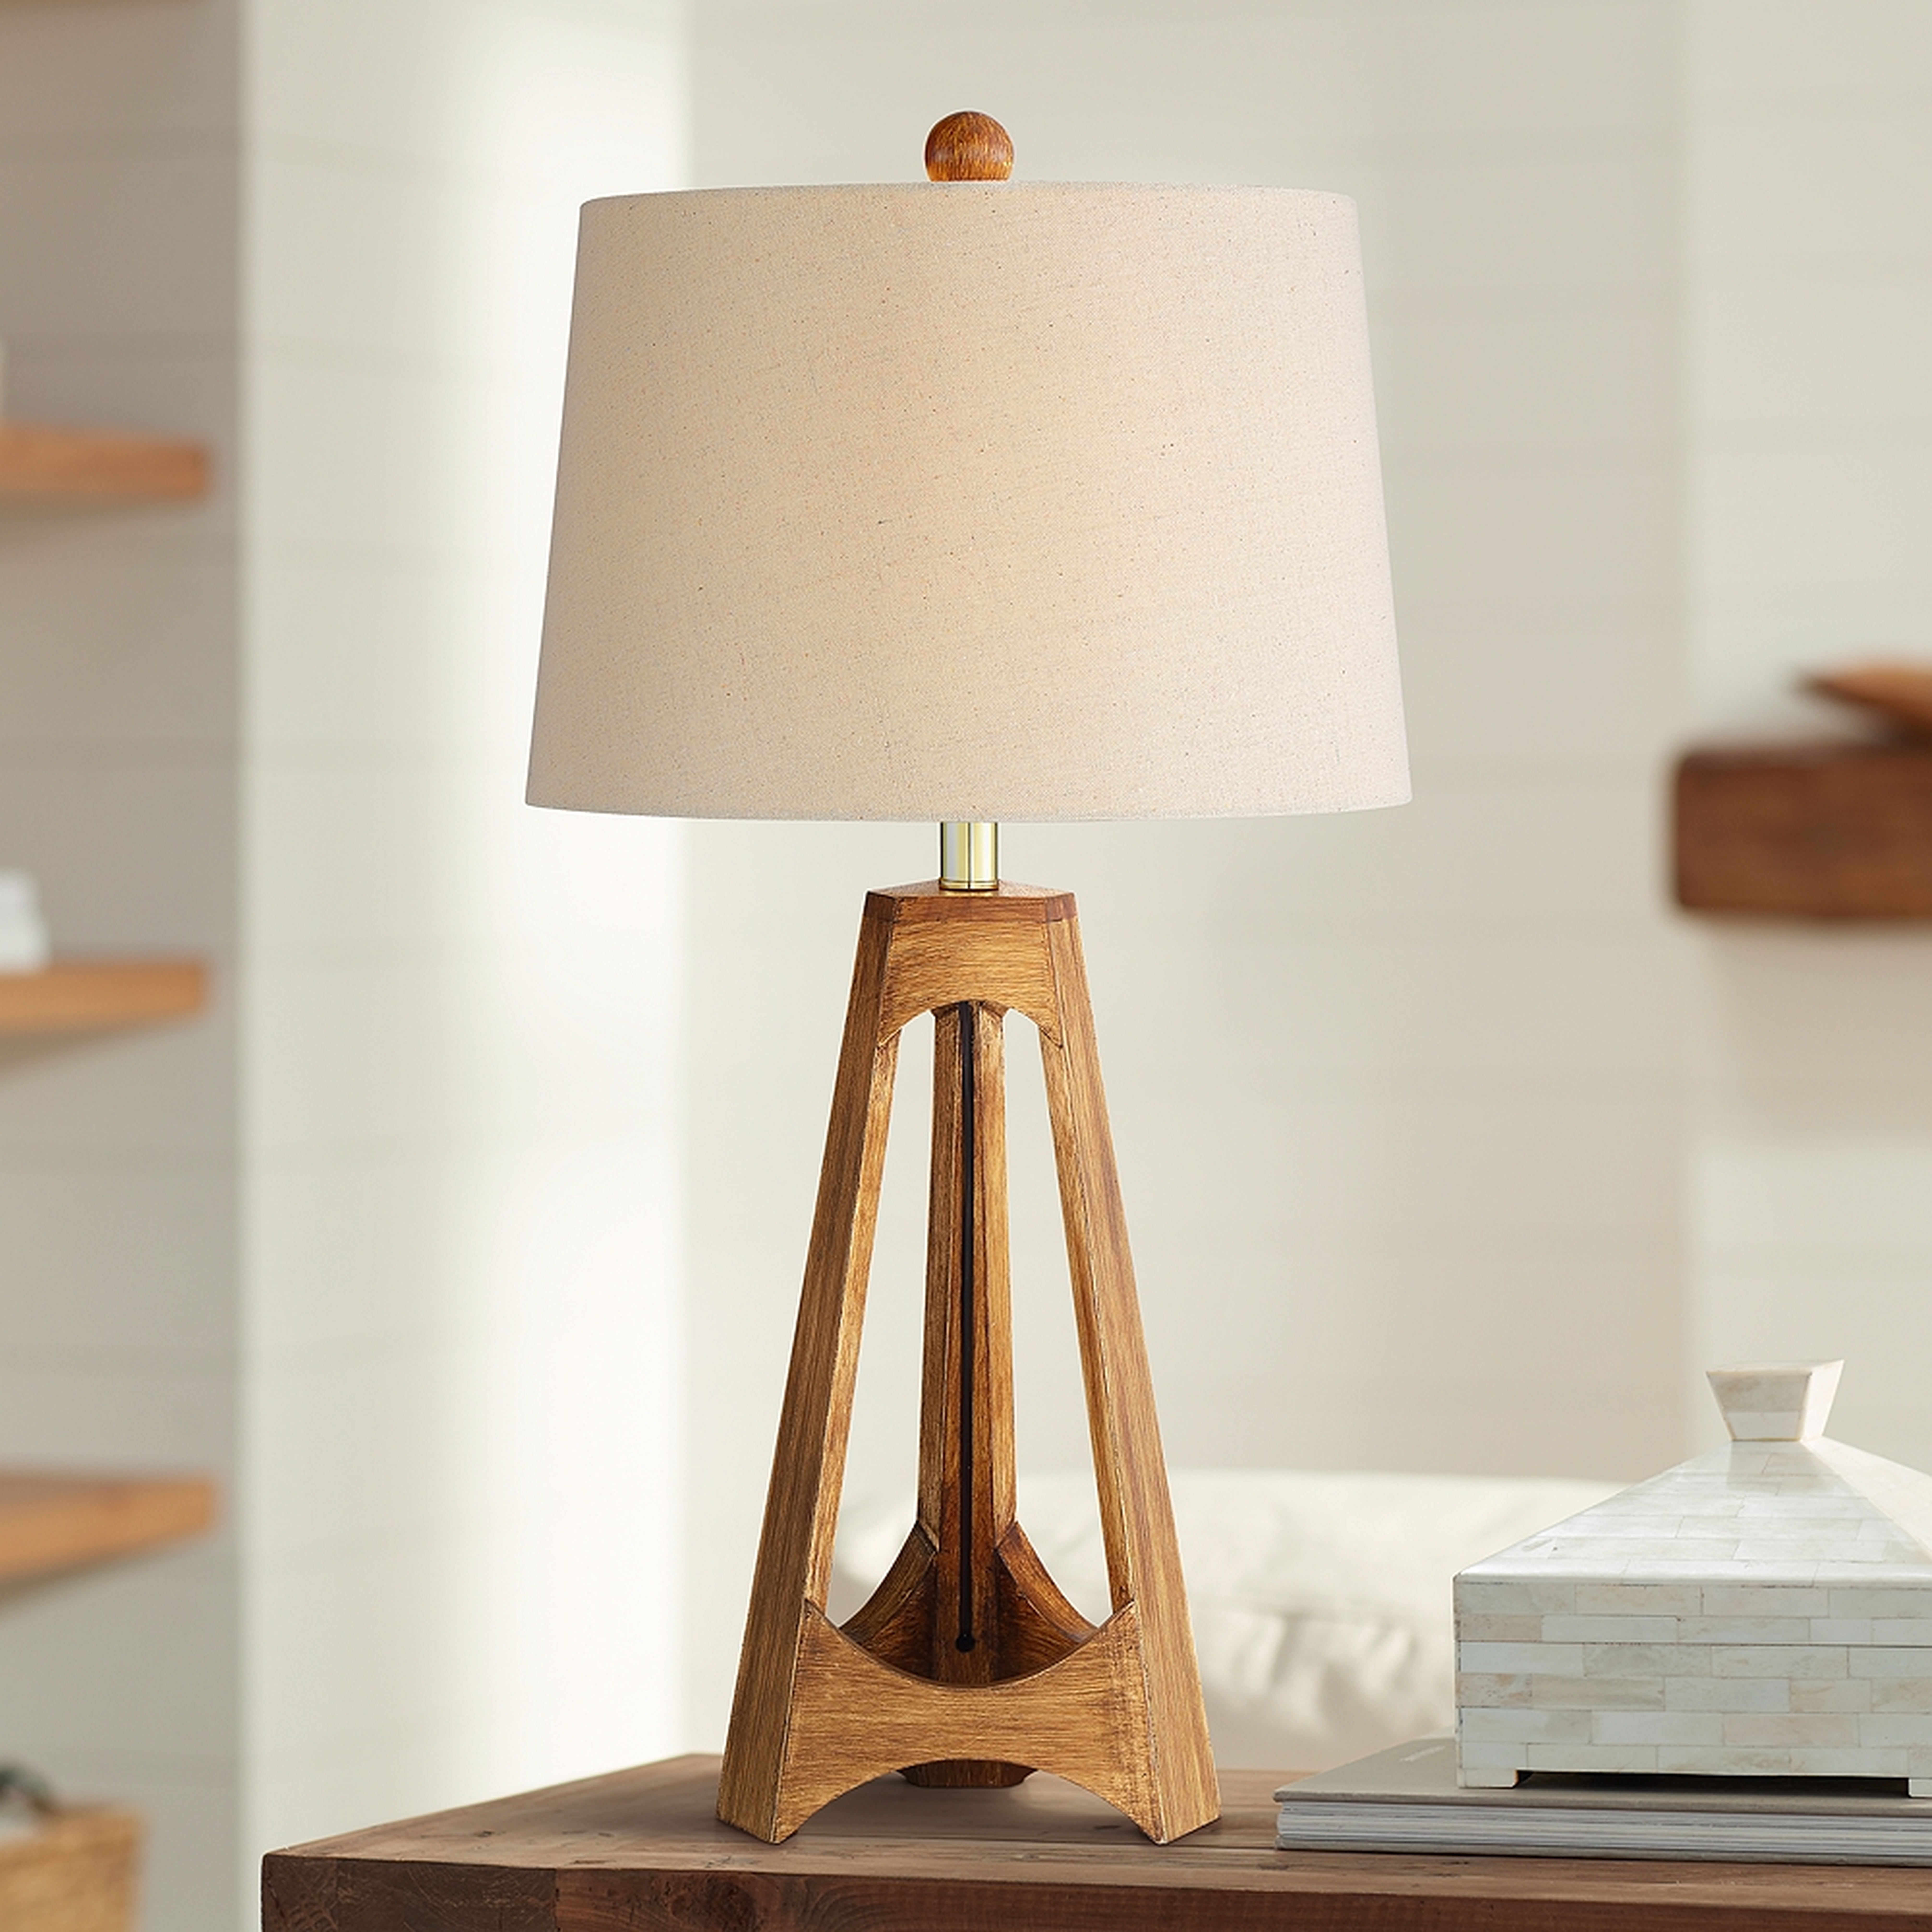 Archie Wood Finish Mid-Century Modern Table Lamp - Style # 80R23 - Lamps Plus